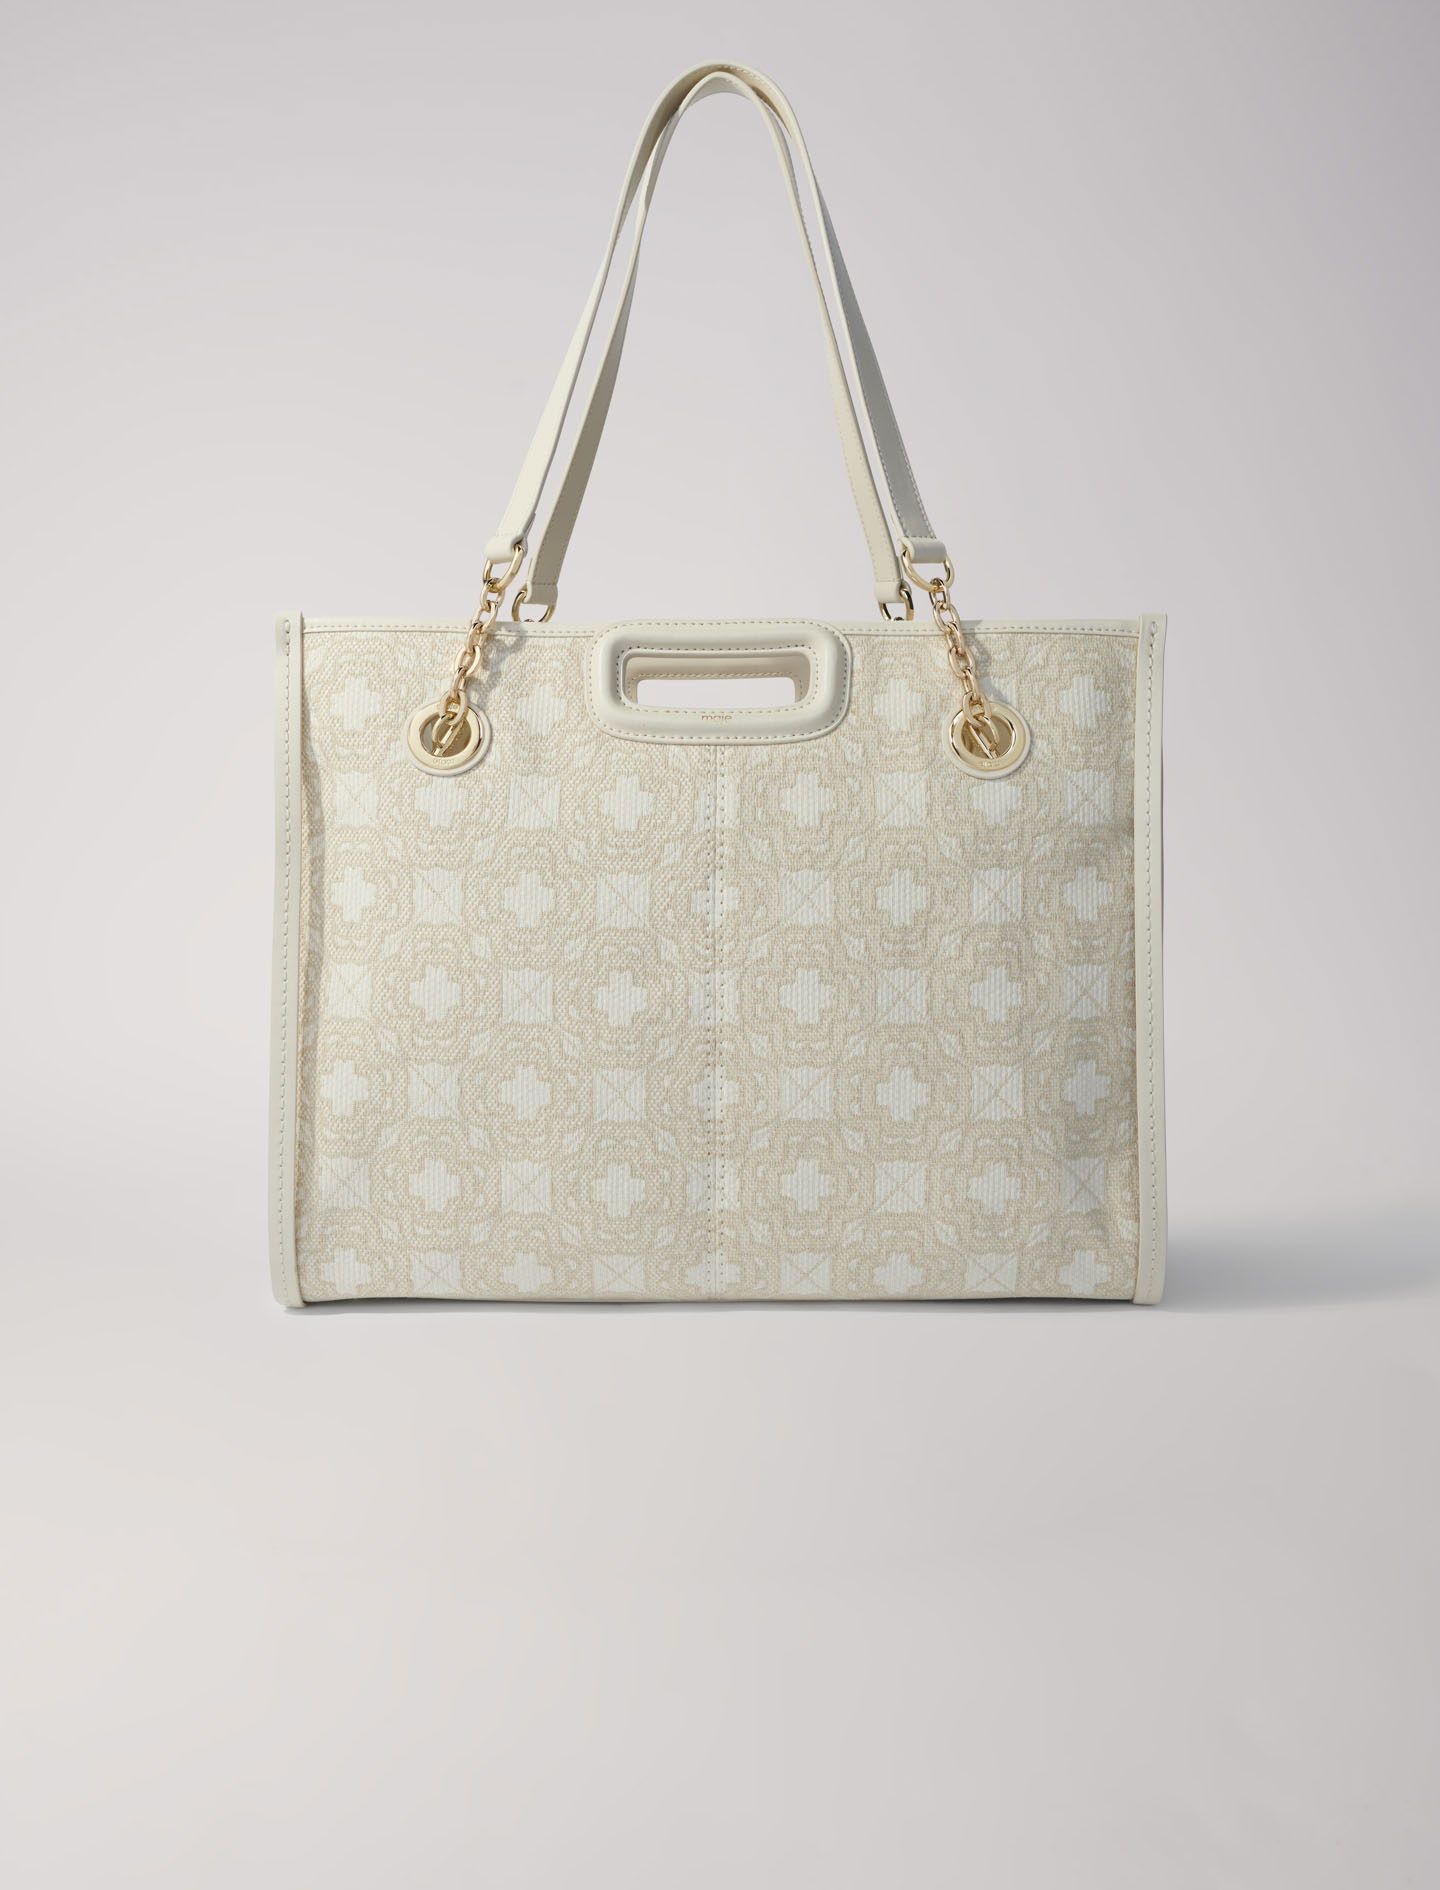 Maje Woman's cotton Lining: Clover print canvas shopping bag for Spring/Summer, in color Ecru / Beige